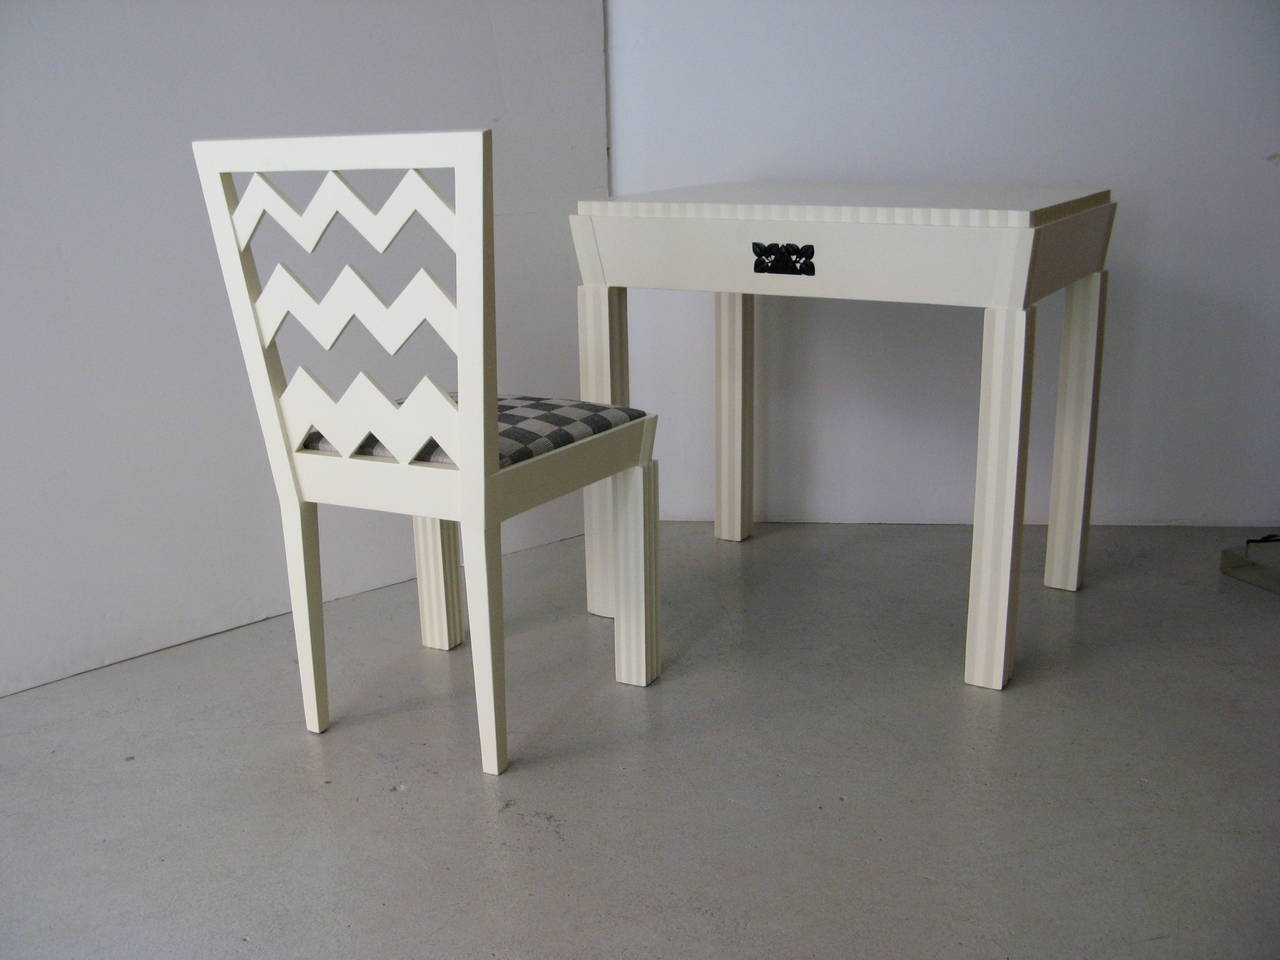 Early 20th Century Josef Hoffmann Attributed Vienna Secession White Lacquered Chair, circa 1910 For Sale